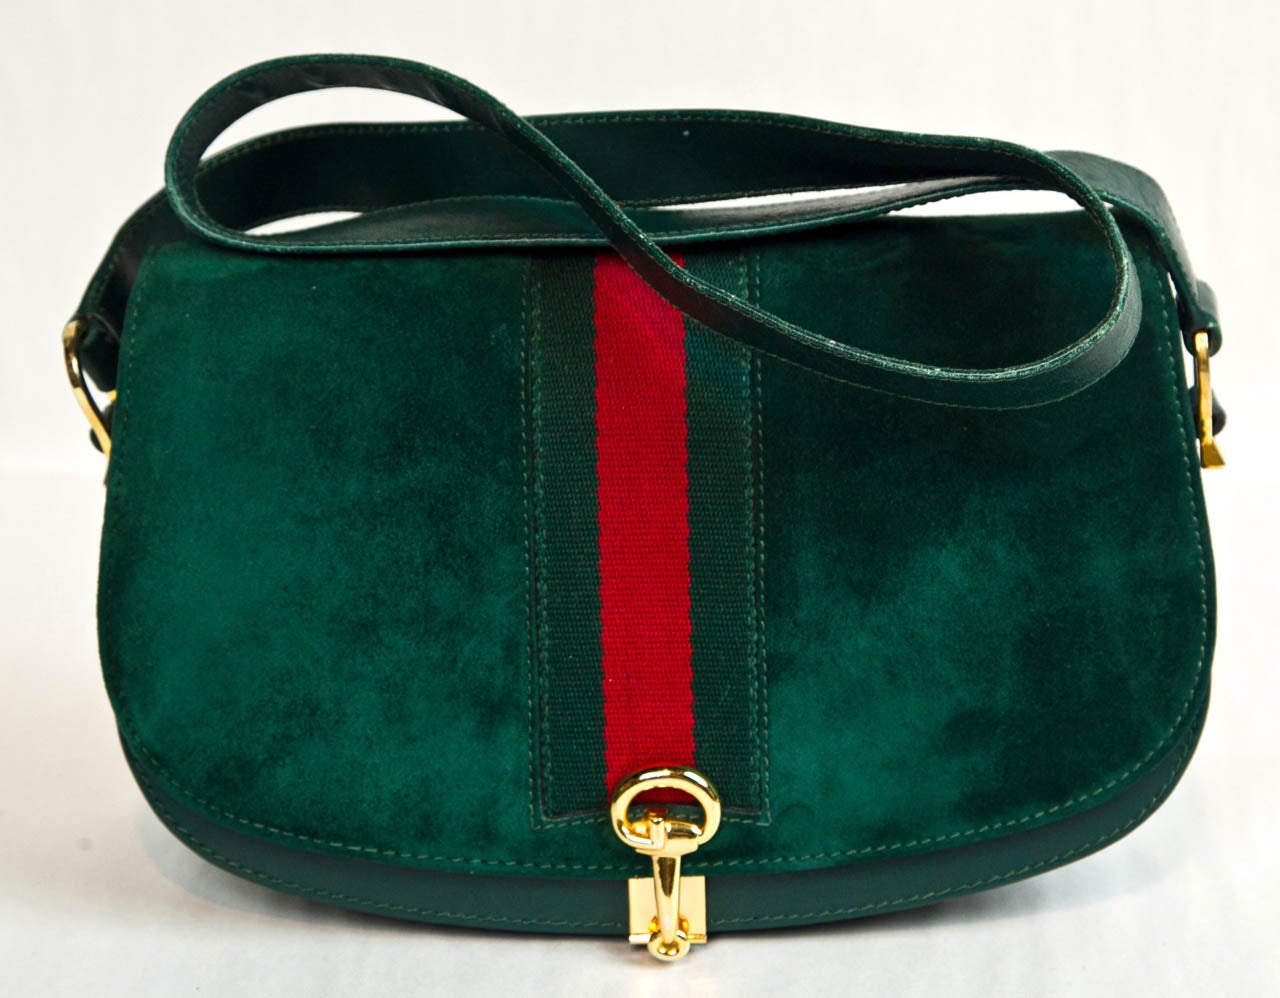 from the funkyfinders archive is this quintessential gucci shoulder bag with signature racing stripe. a fabulous example from this fashion house as per it's color palette, hardware and styling.

1970's / 1980's